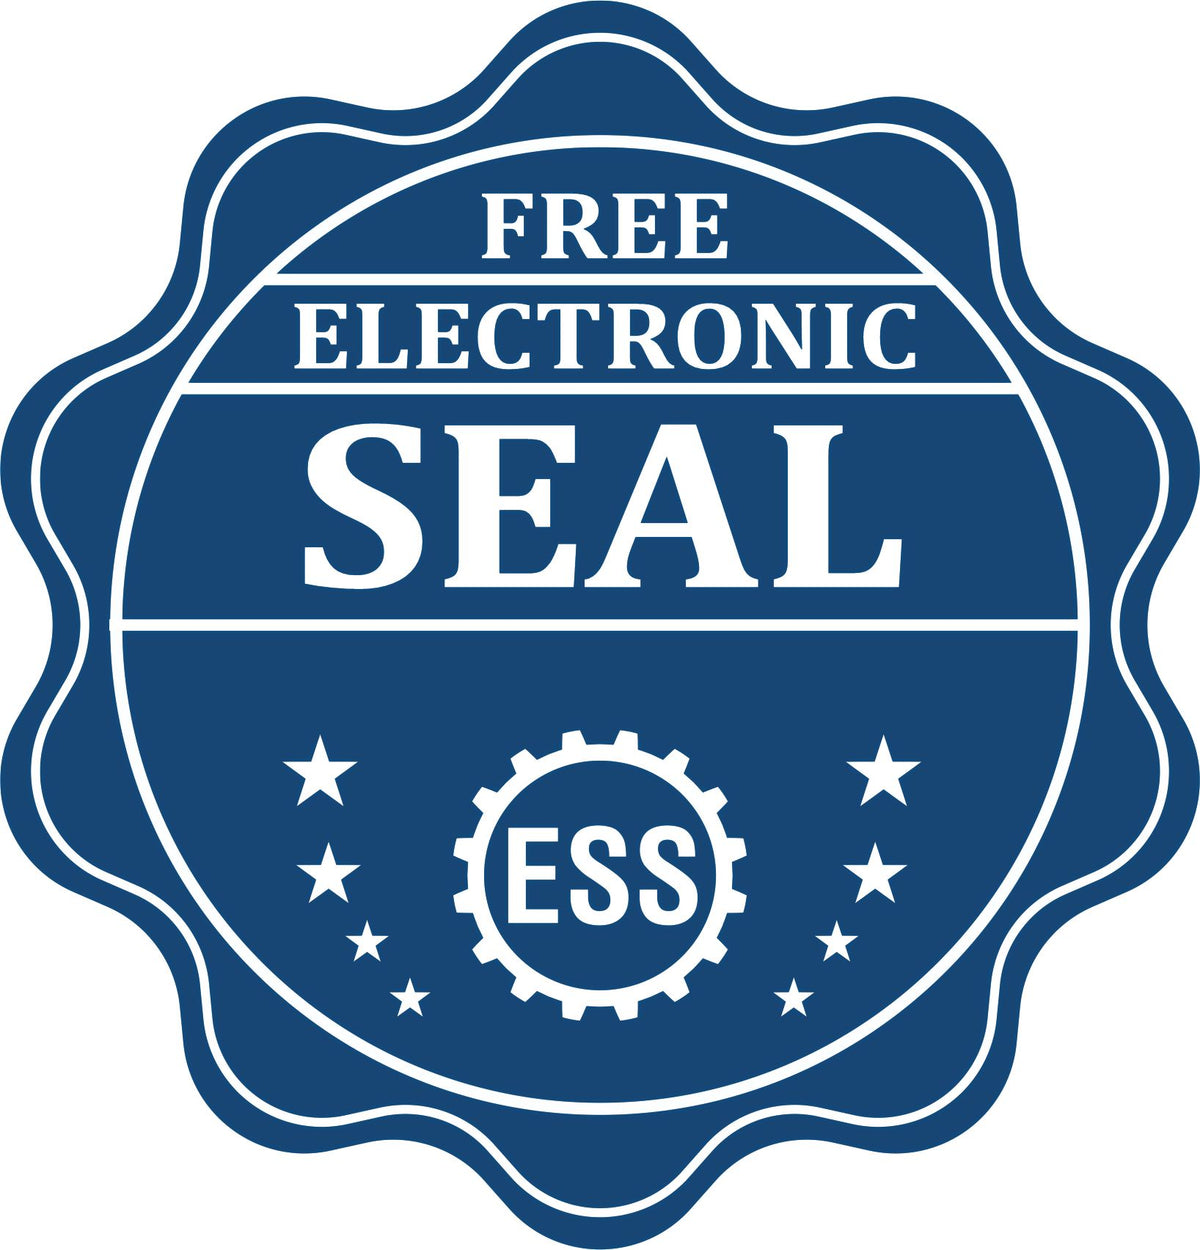 A badge showing a free electronic seal for the Maryland Professional Engineer Seal Stamp with stars and the ESS gear on the emblem.